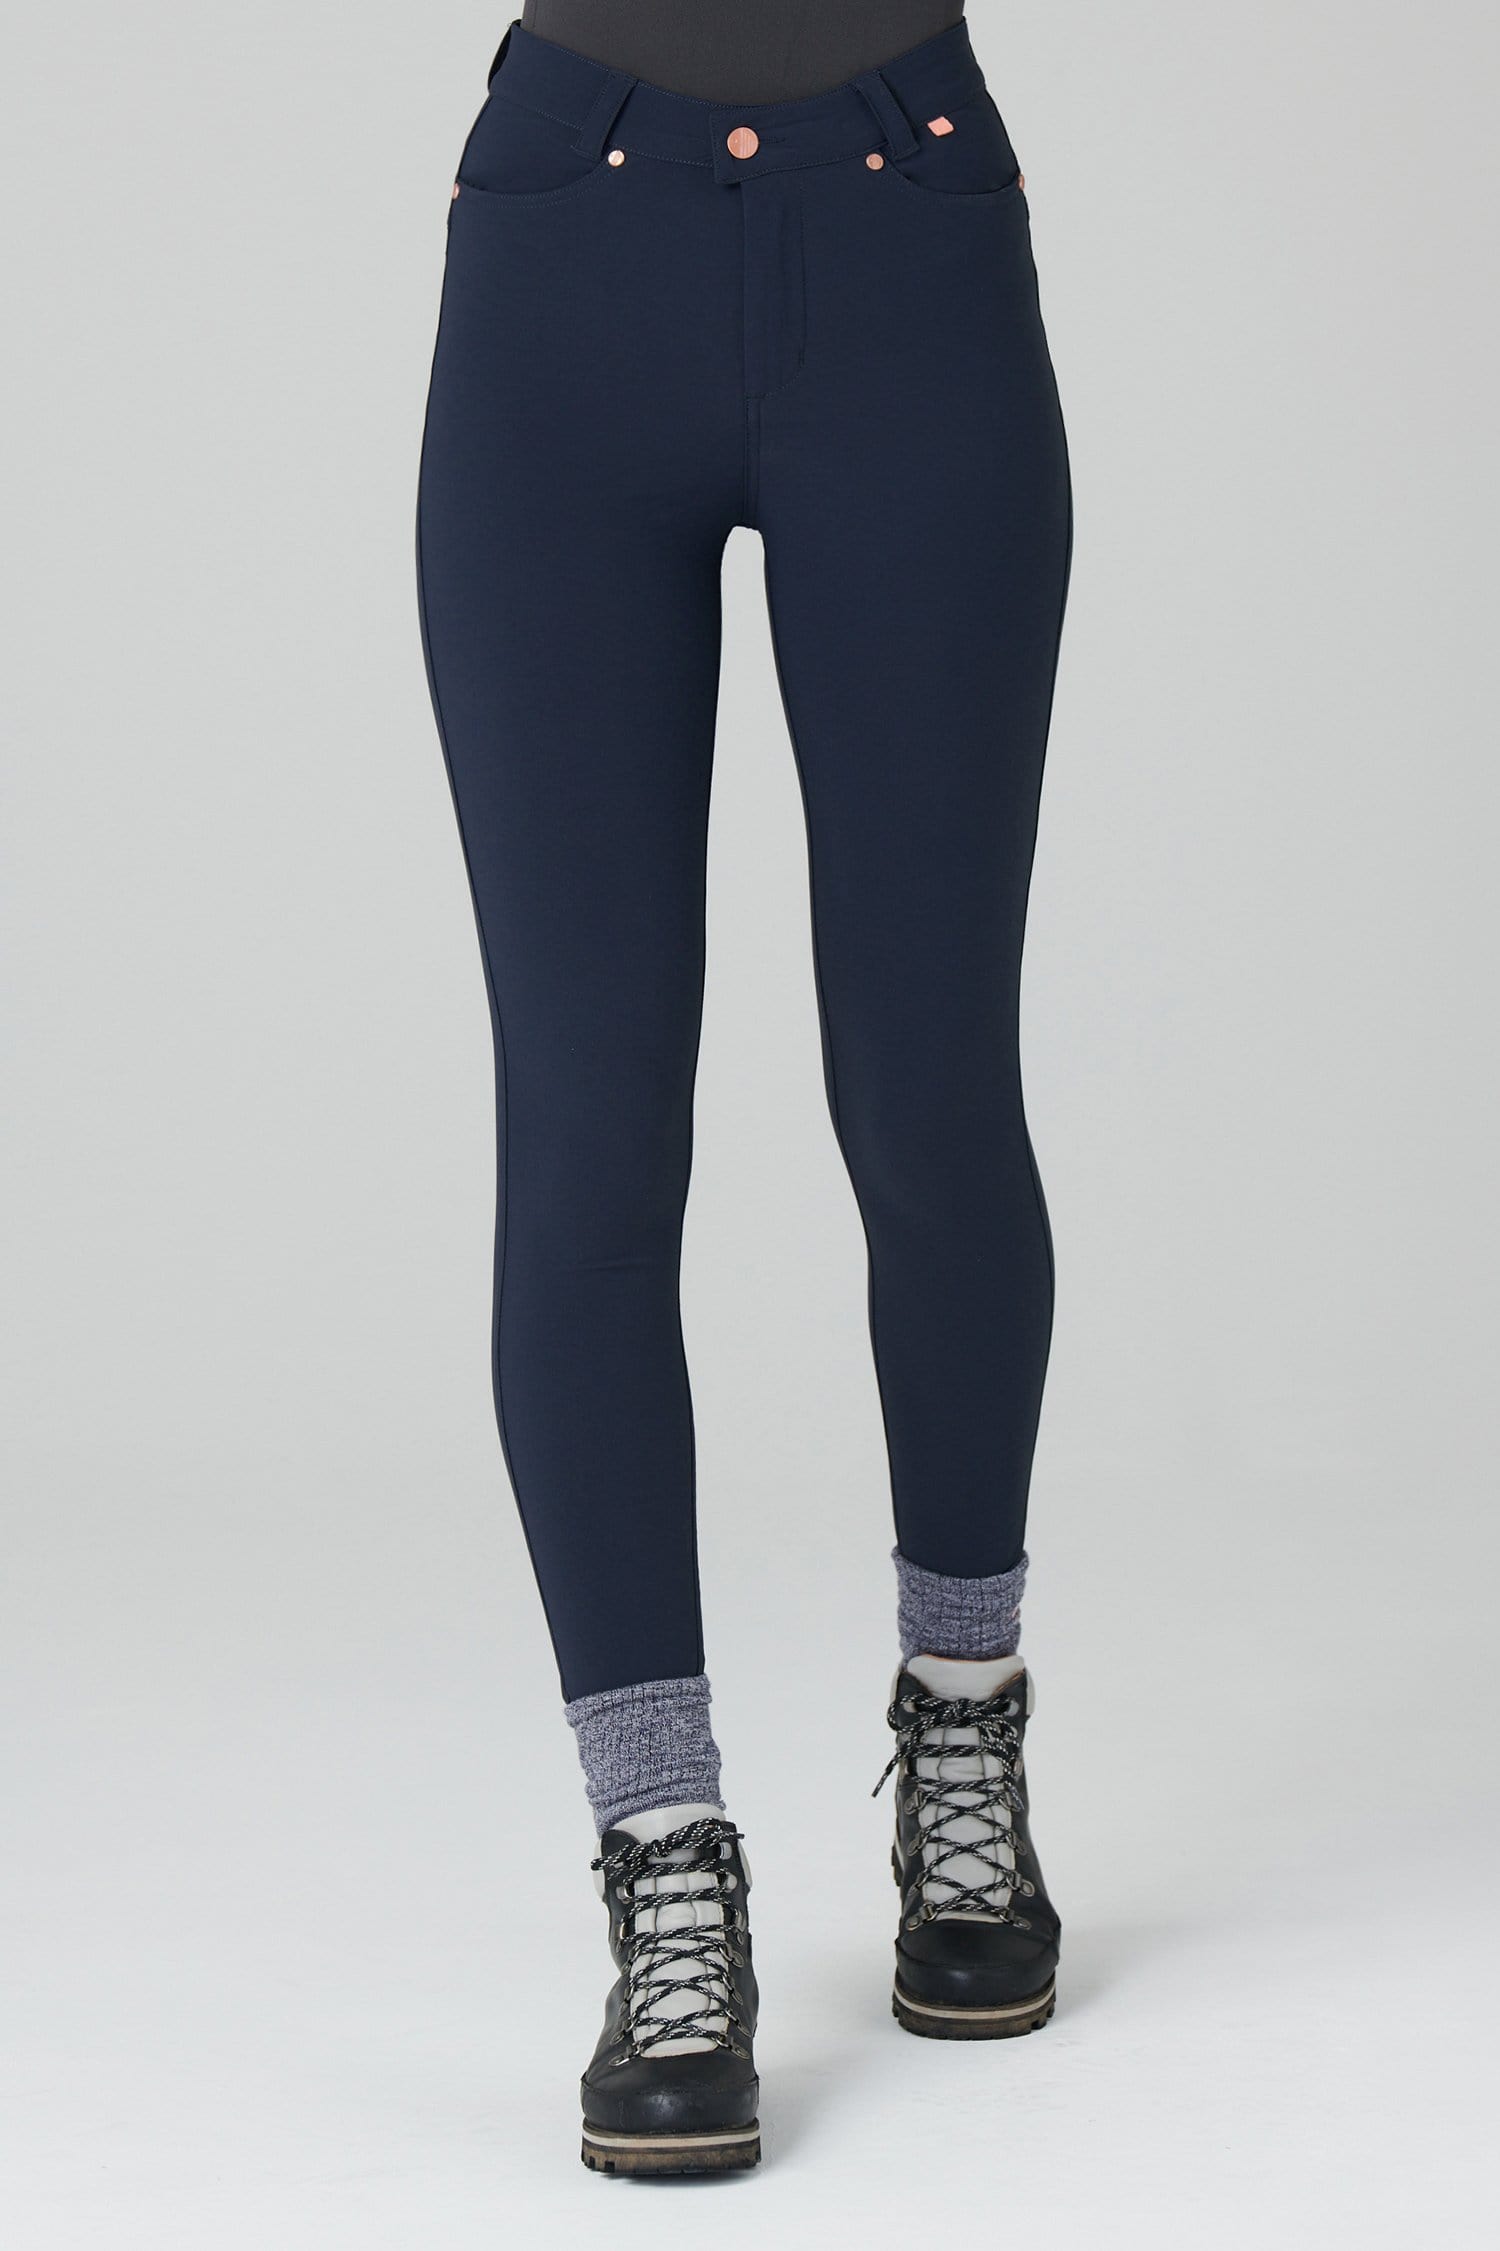 Thermal Skinny Outdoor Trousers - Deep Navy - 28p / Uk10 - Womens - Acai Outdoorwear